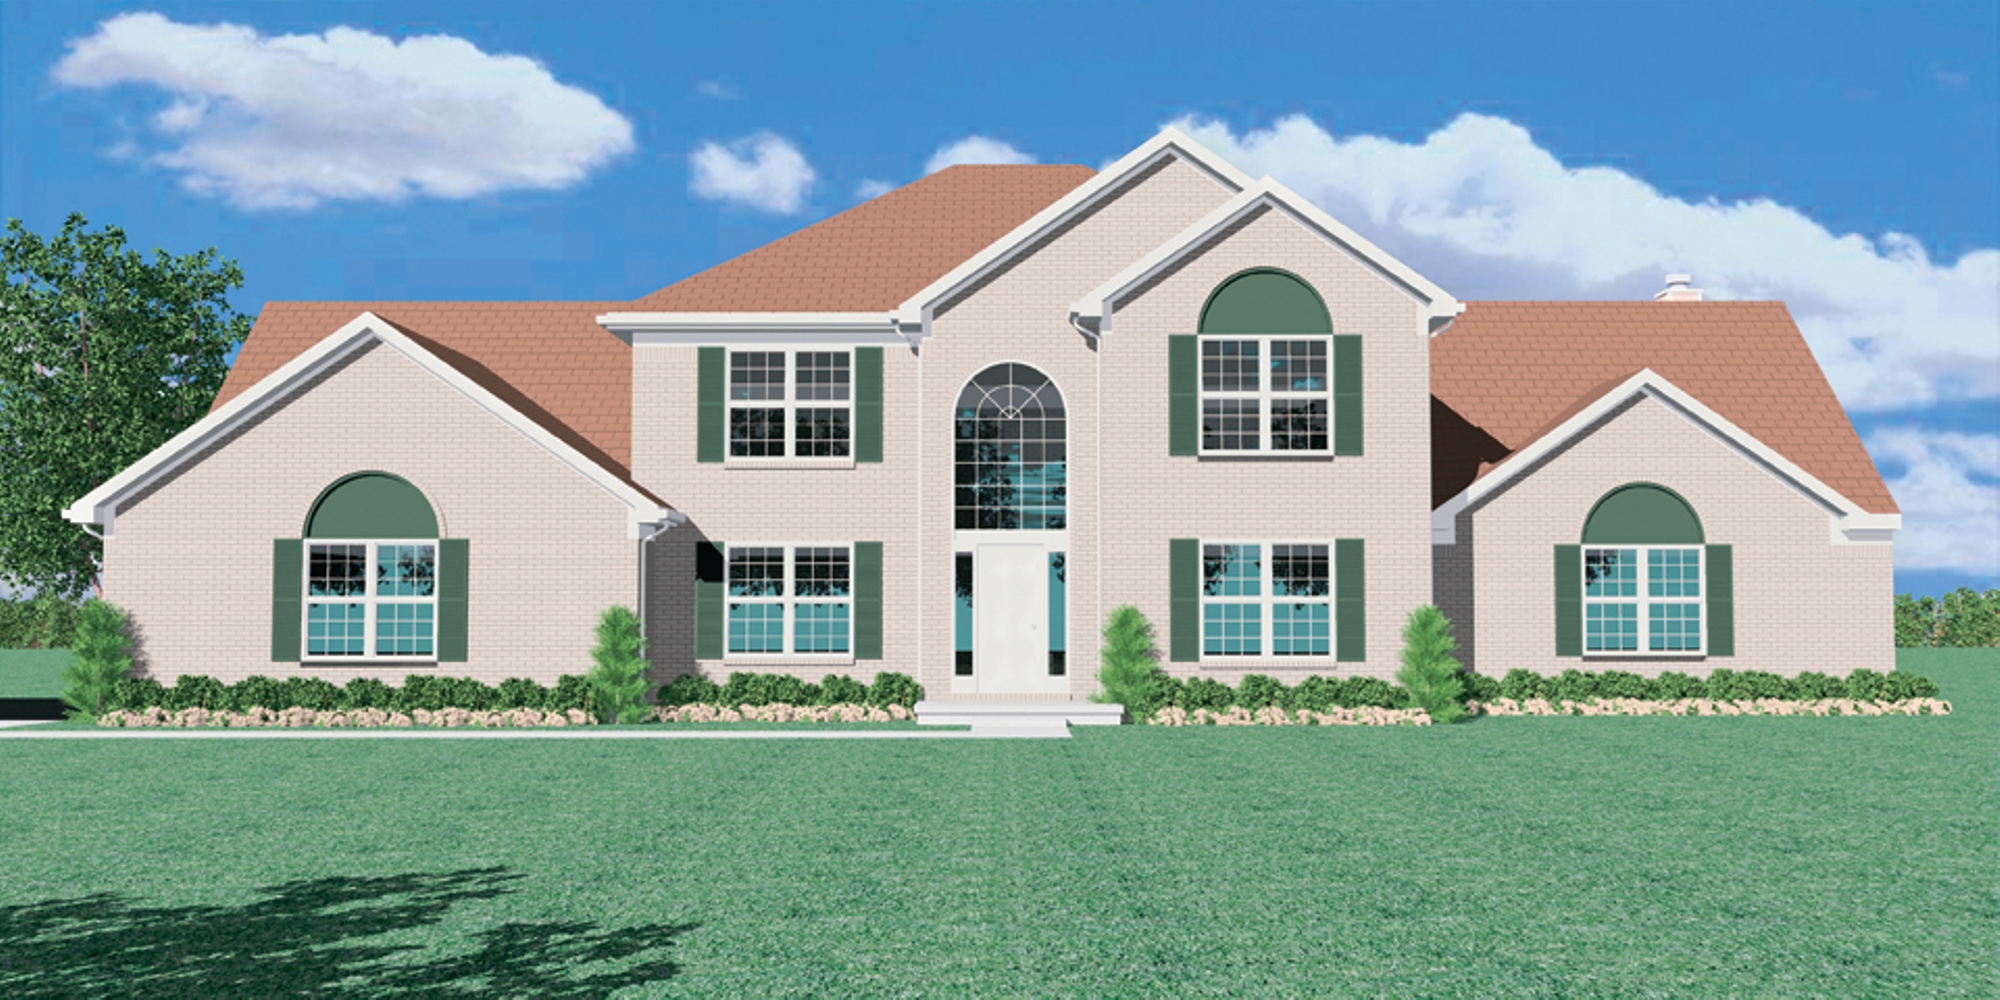 Two Story Home Models Concord 1